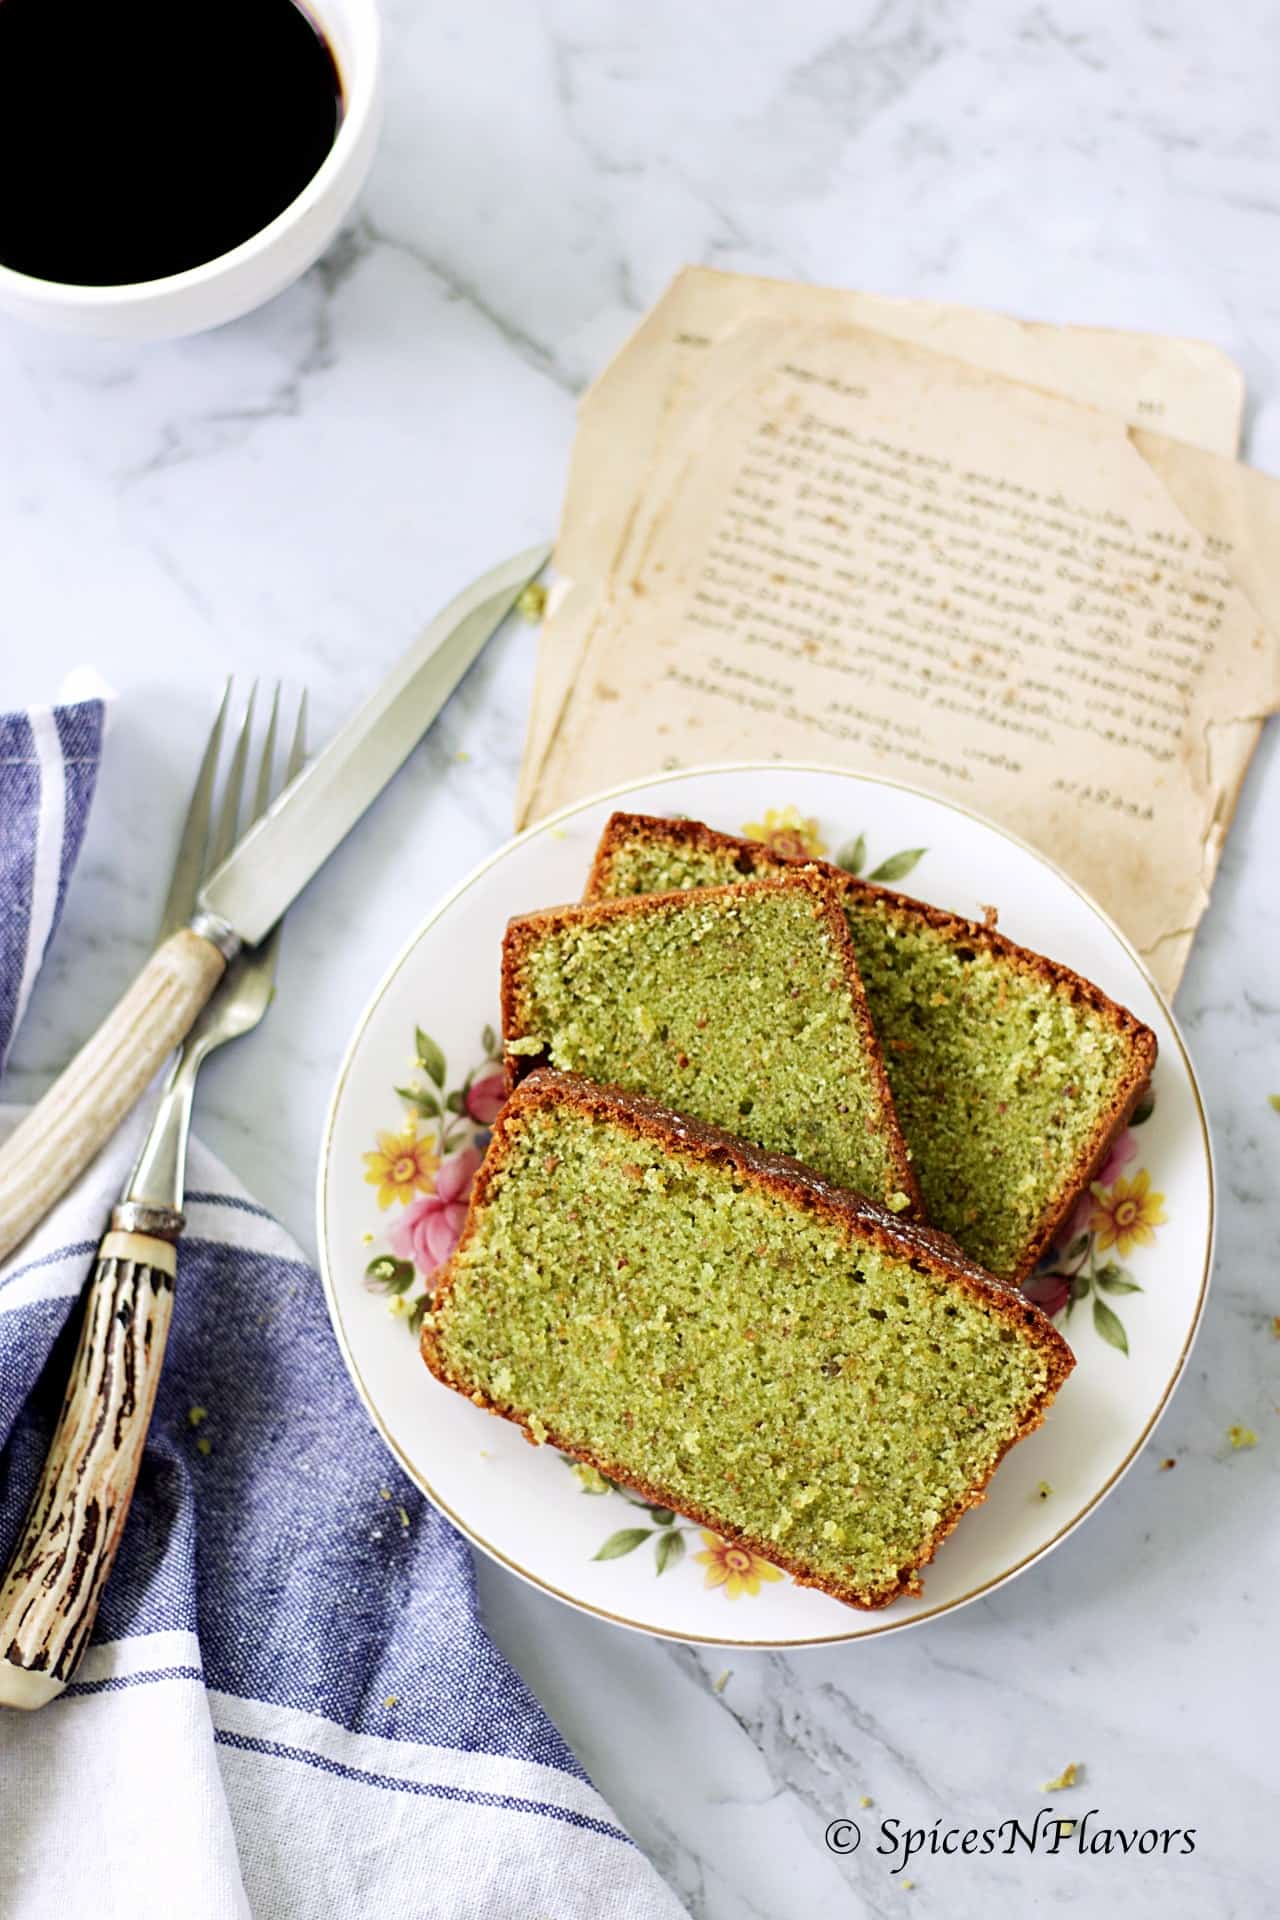 horizontal image of pistachio loaf cake showing the texture